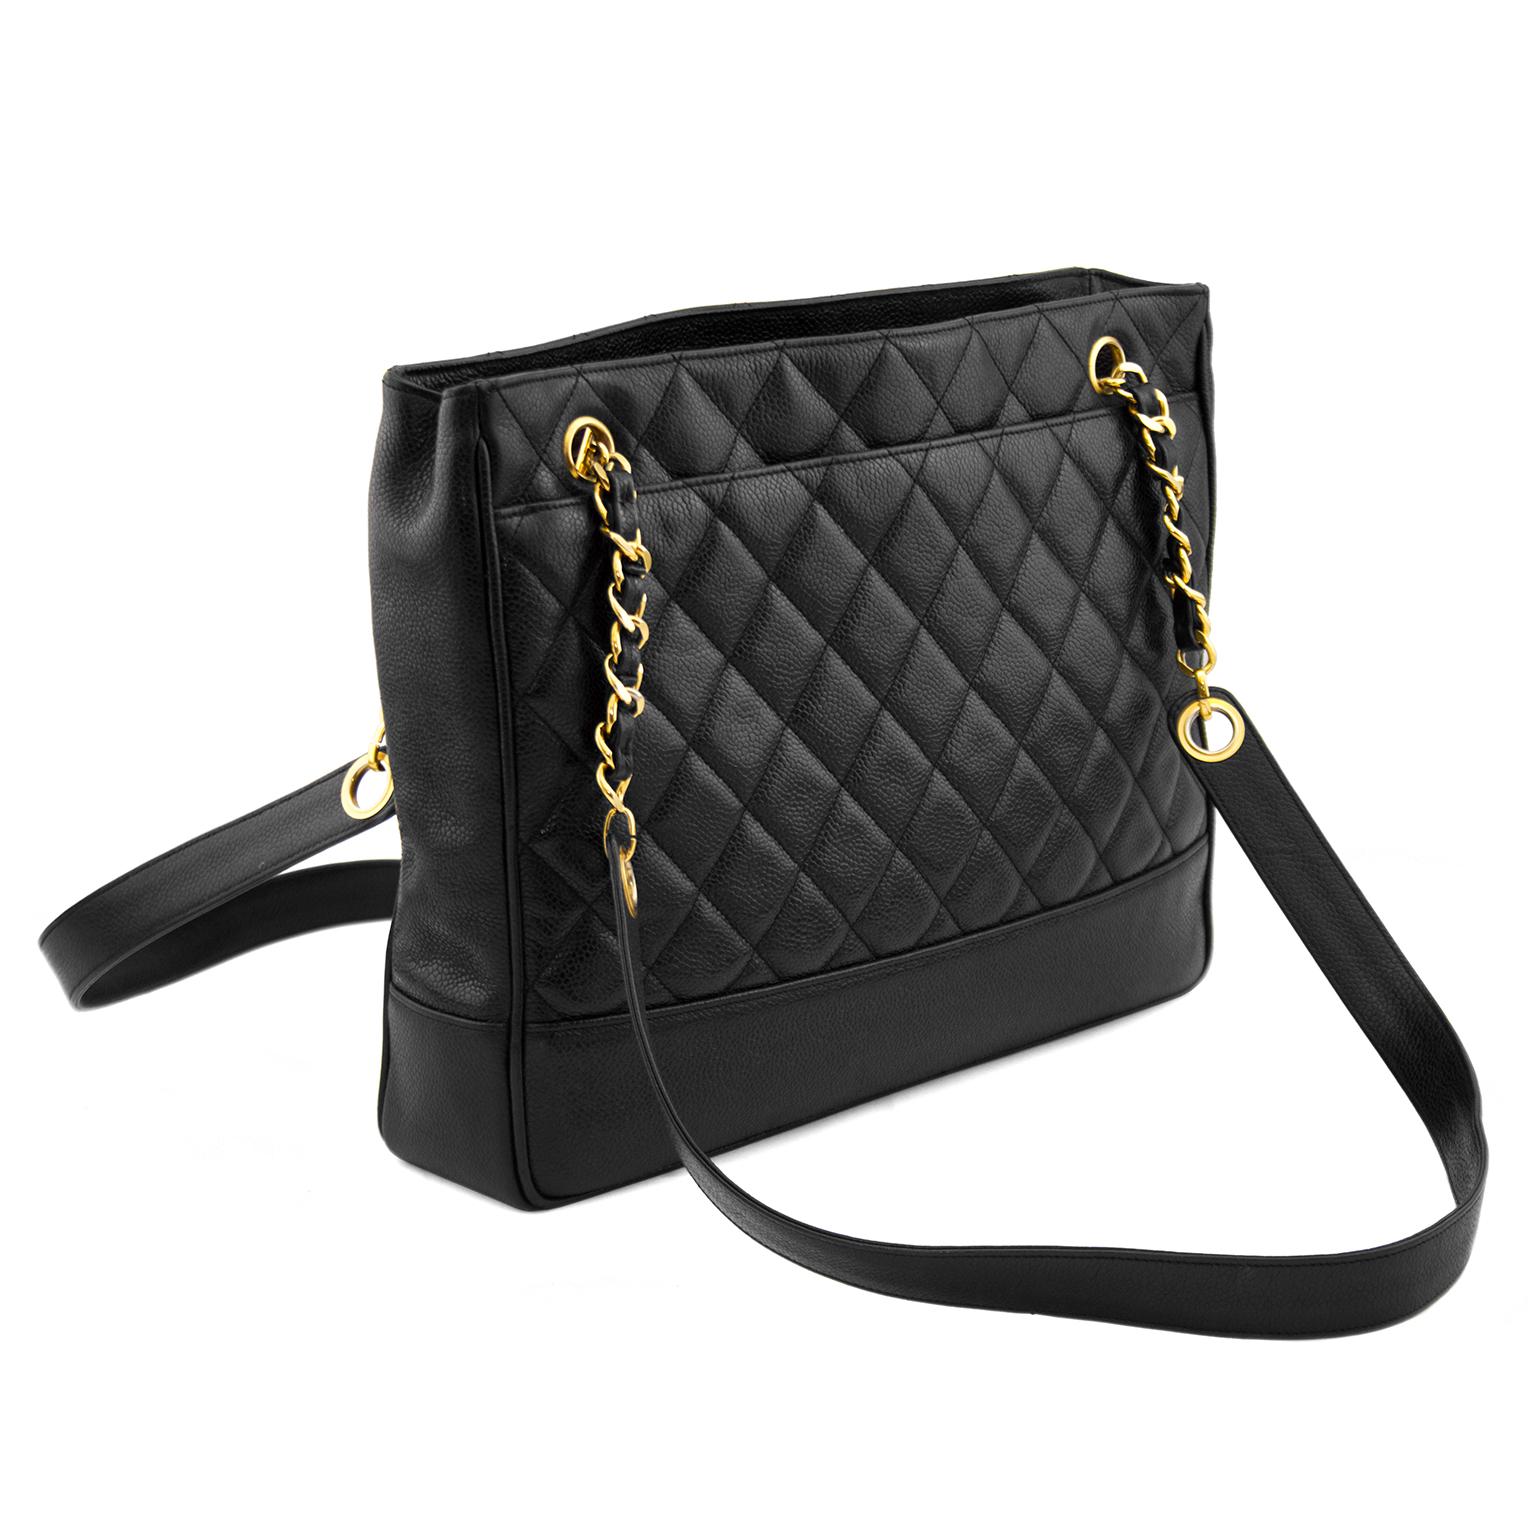 A bag that never goes out of style, Chanel black caviar leather shoulder bag with double straps and exterior pockets. The solid leather shoulder straps have gold chain and leather sections at the base that toggle into grommets at the top of the bag.